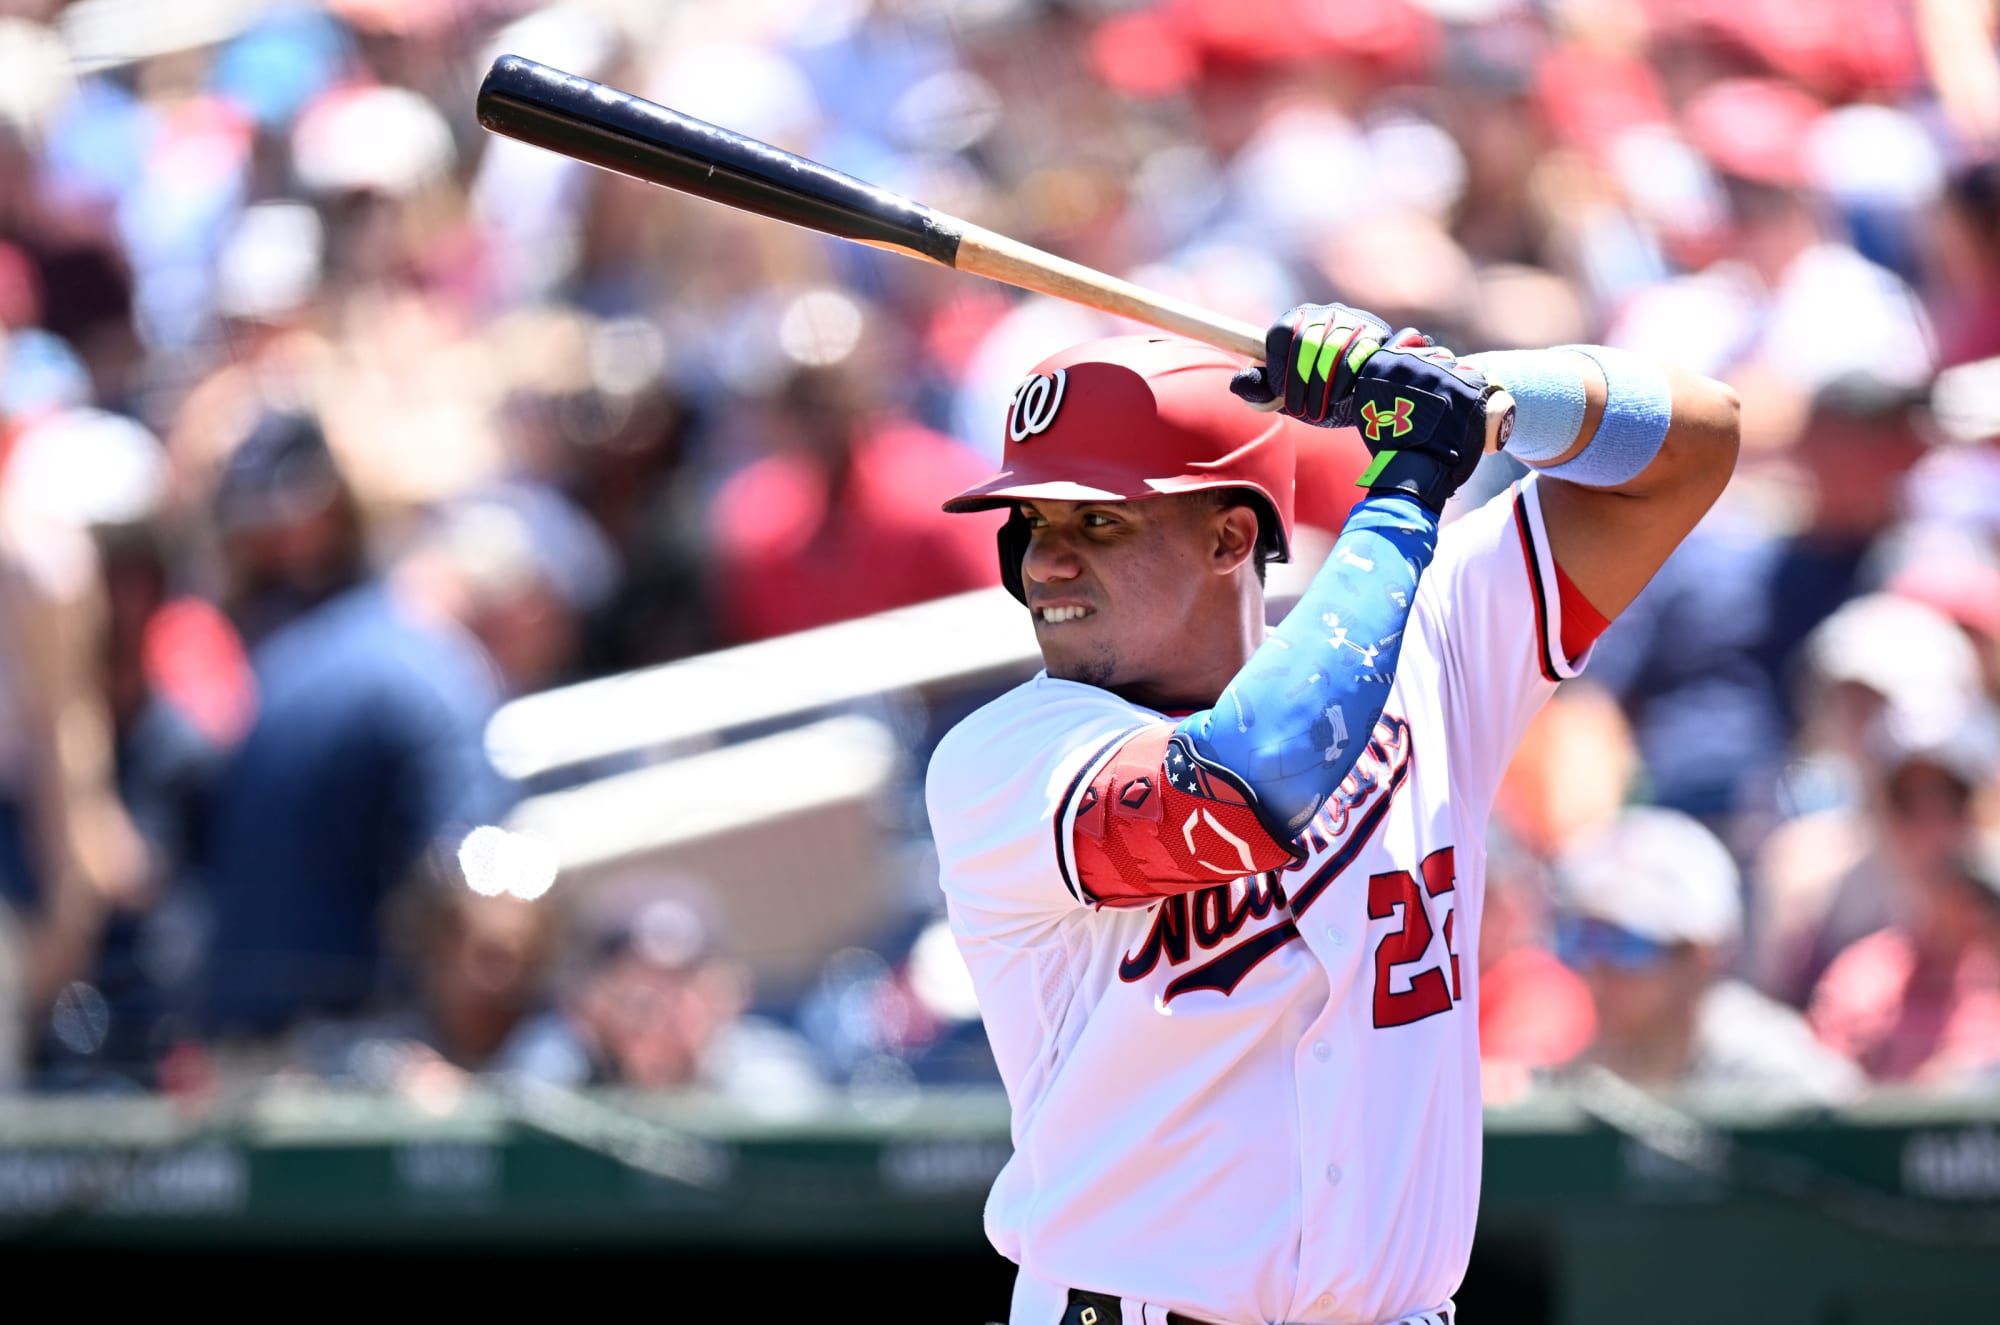 Web sleuths are connecting dots that result in Juan Soto signing with the Pink Sox